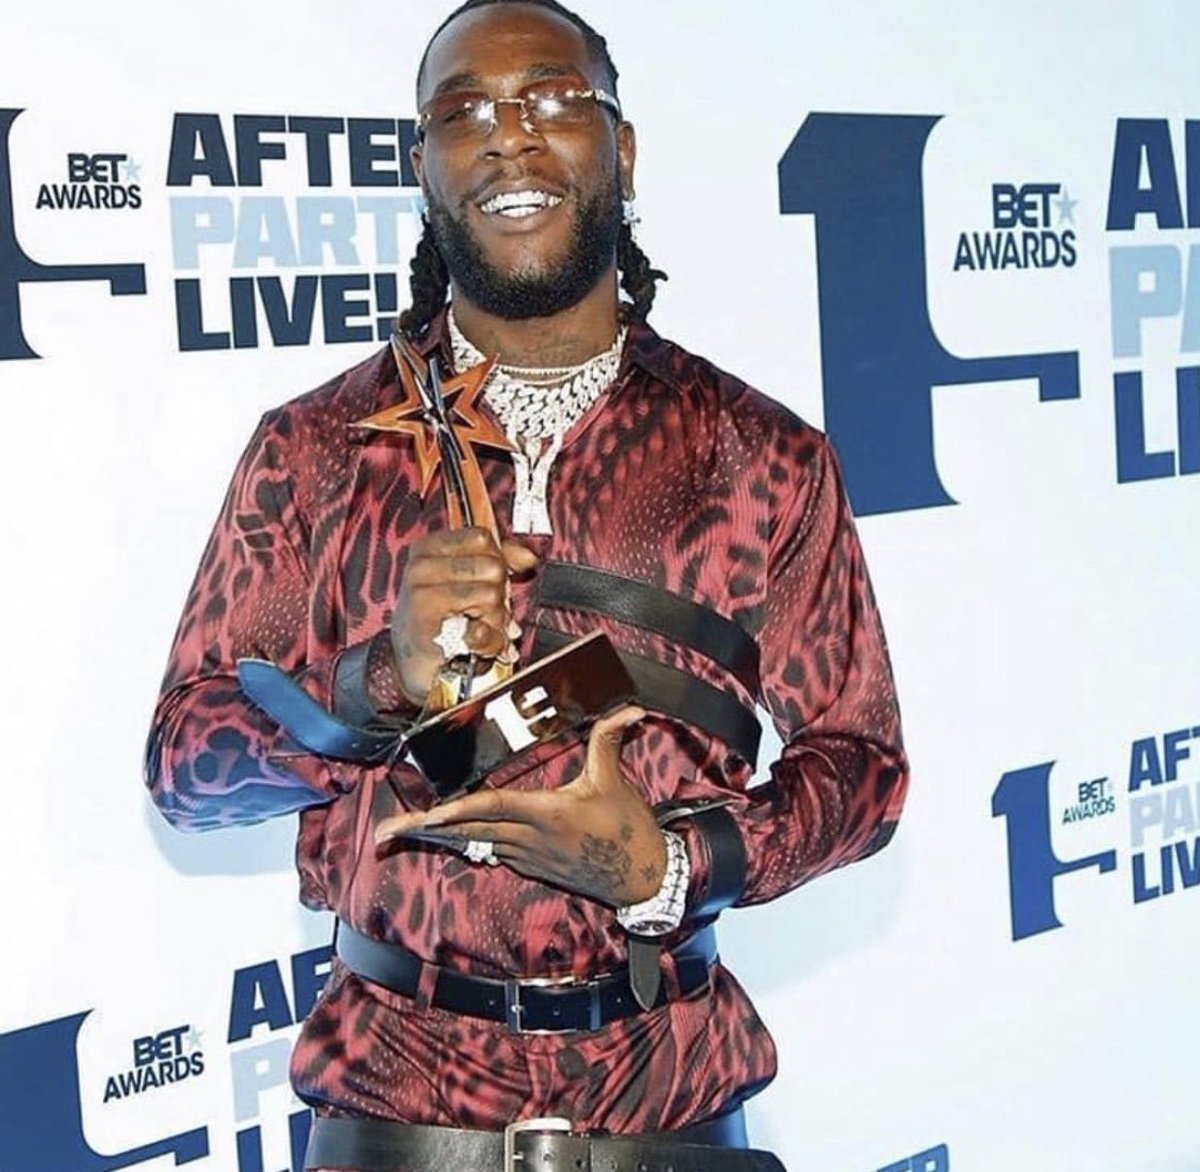 Nigerians See Me As Special Now Because The Rest Of The World Loves Me- Burna Boy 1